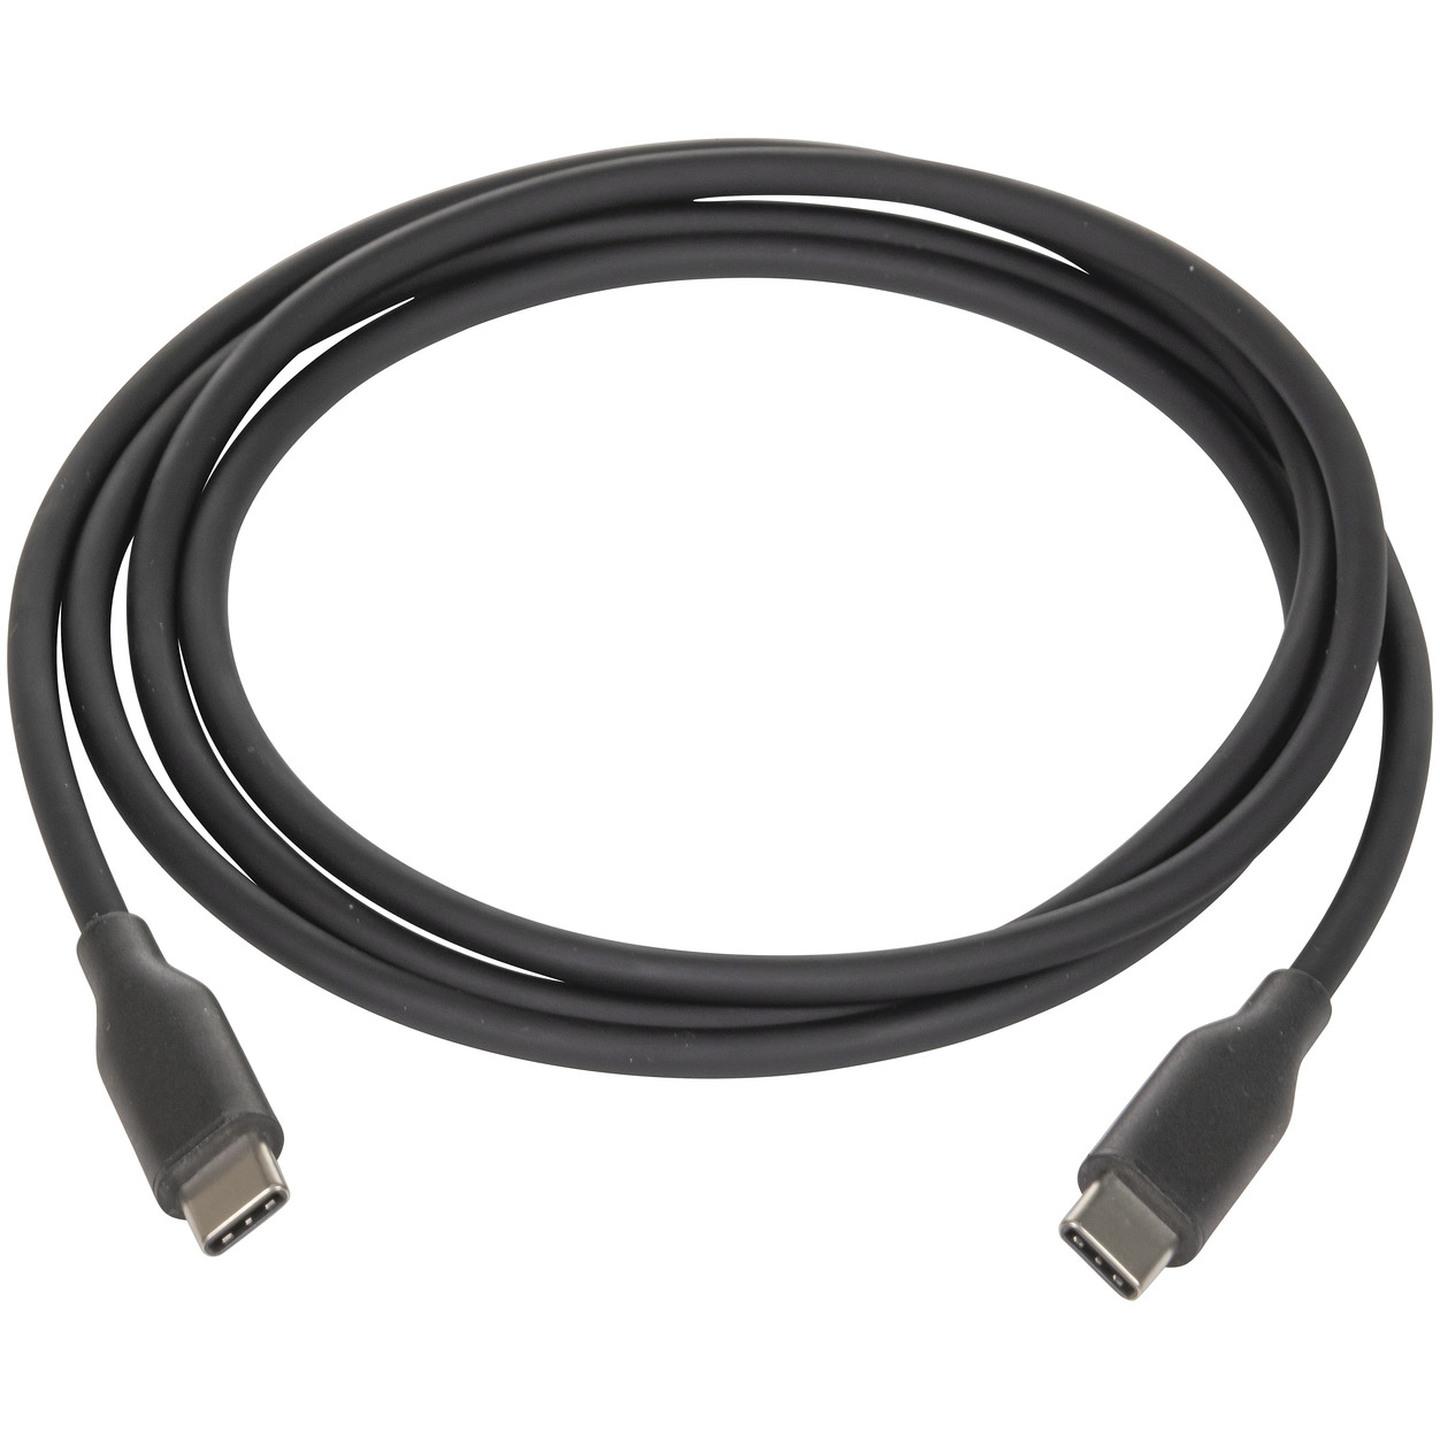 Black Silicone USB Type-C to USB Type-C Cable 1.2m